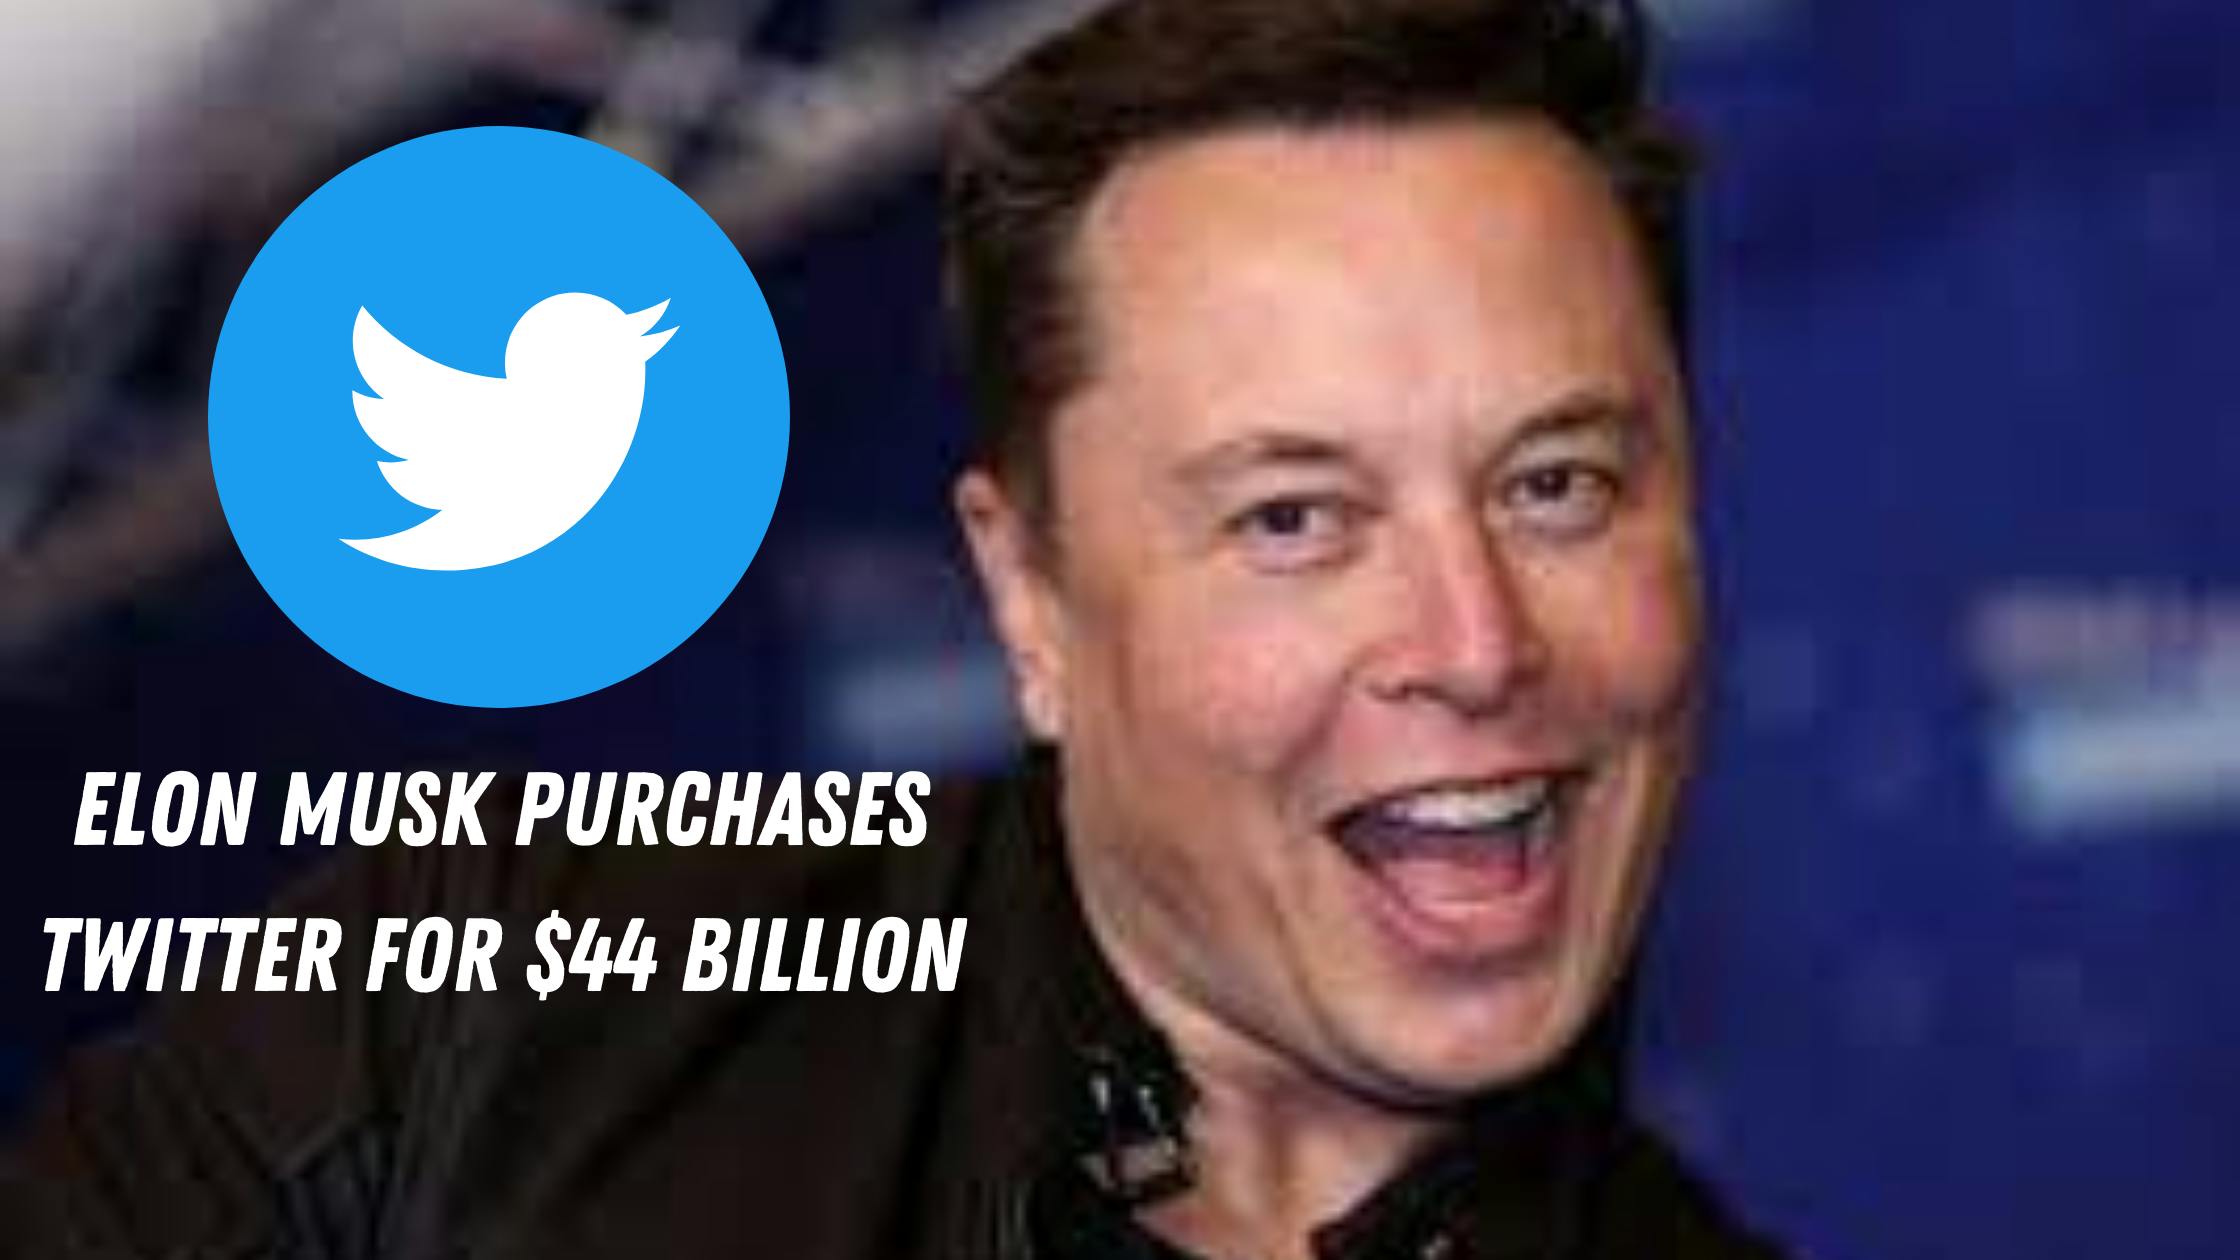 Elon Musk Purchases Twitter for $44 Billion, Social Media Company Will Transition to a Private Company